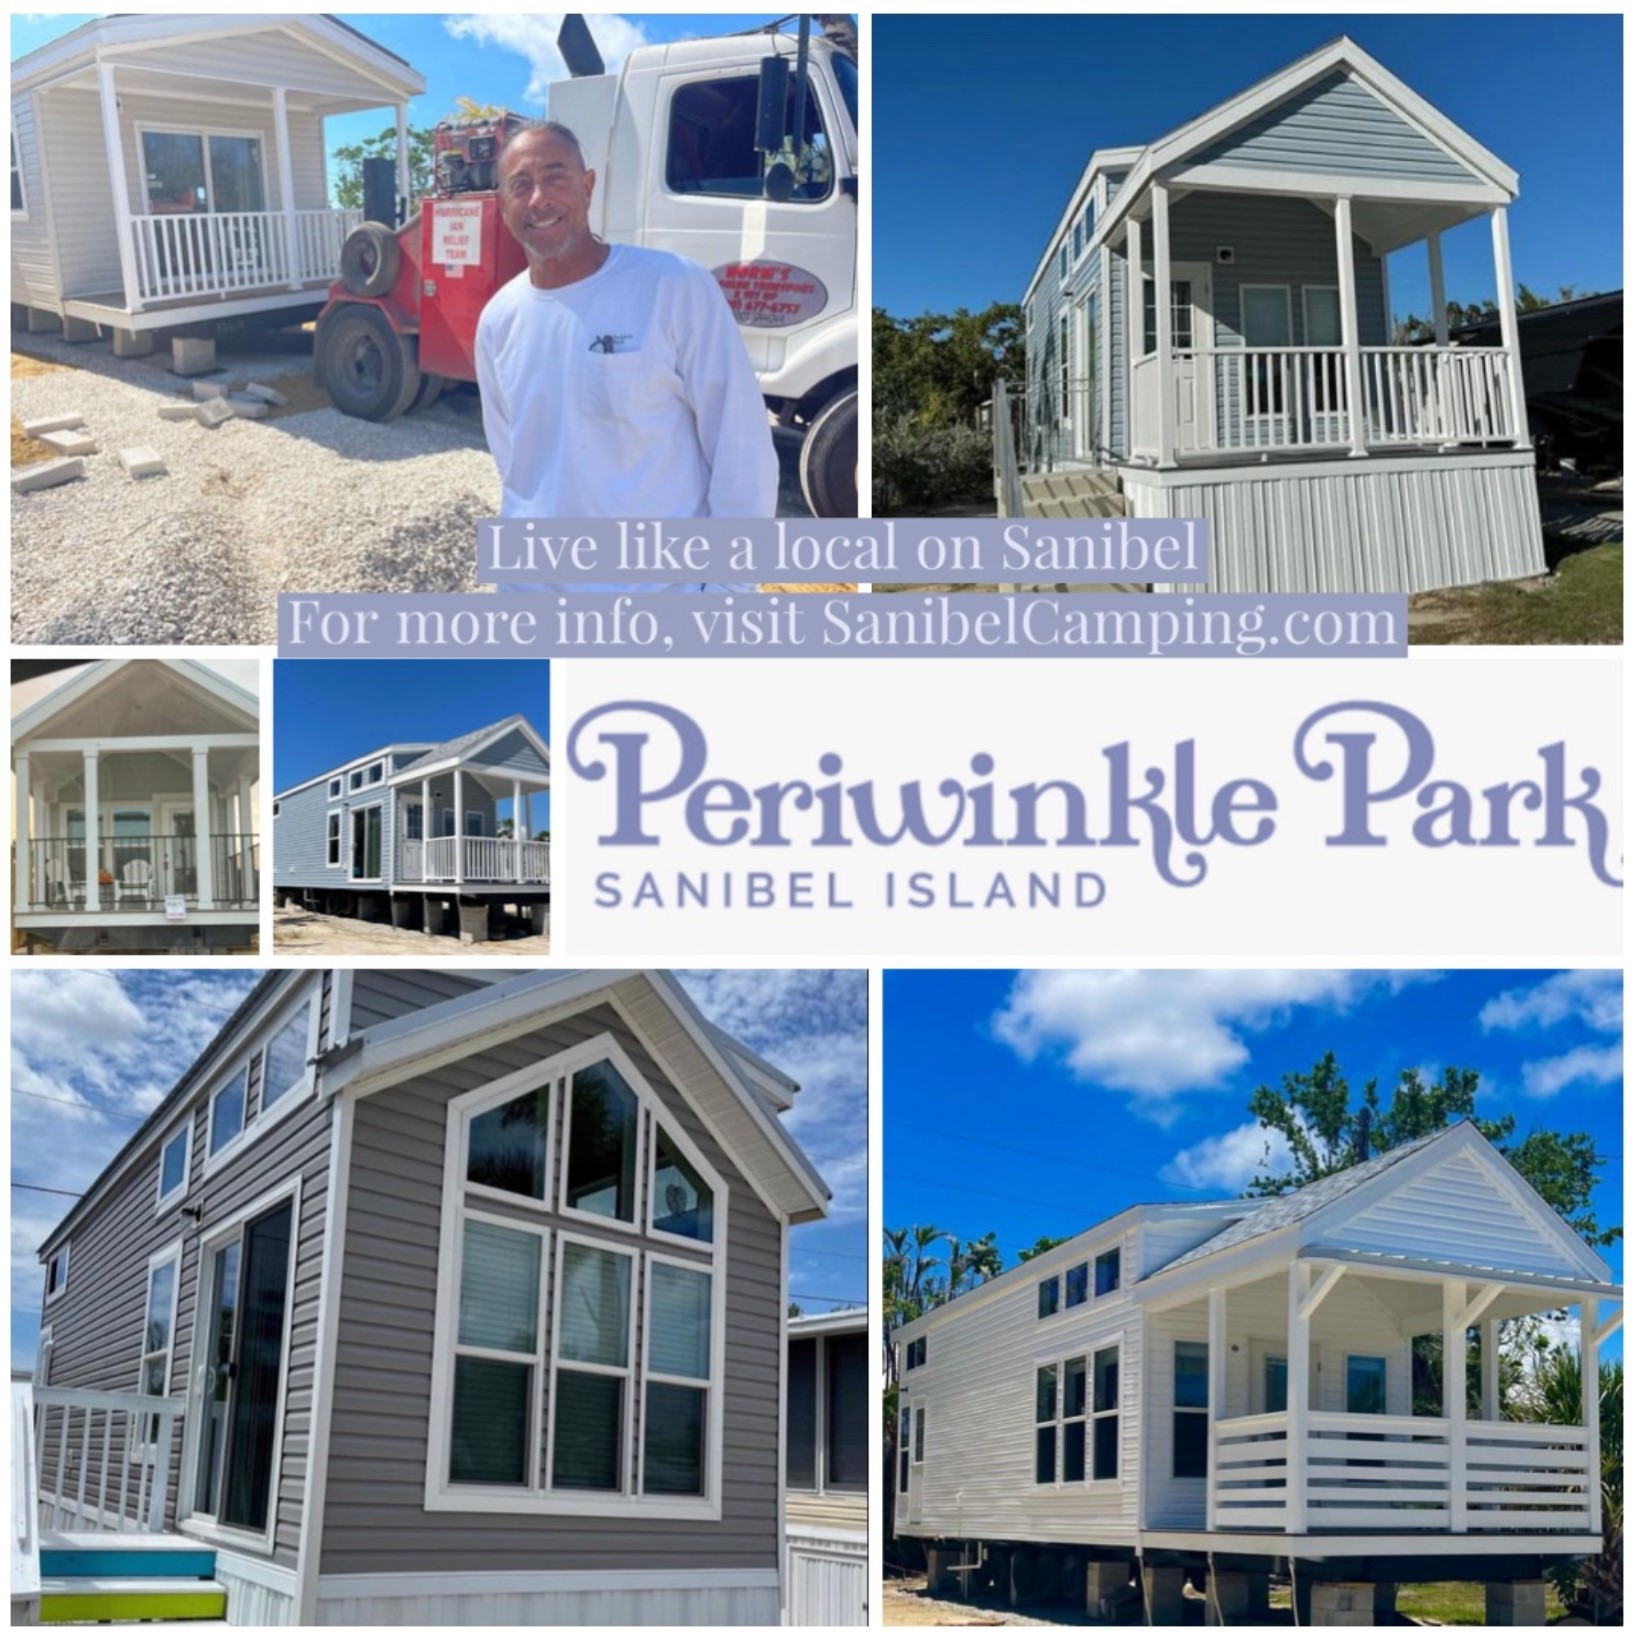 Experience the true essence of island living at Periwinkle Park